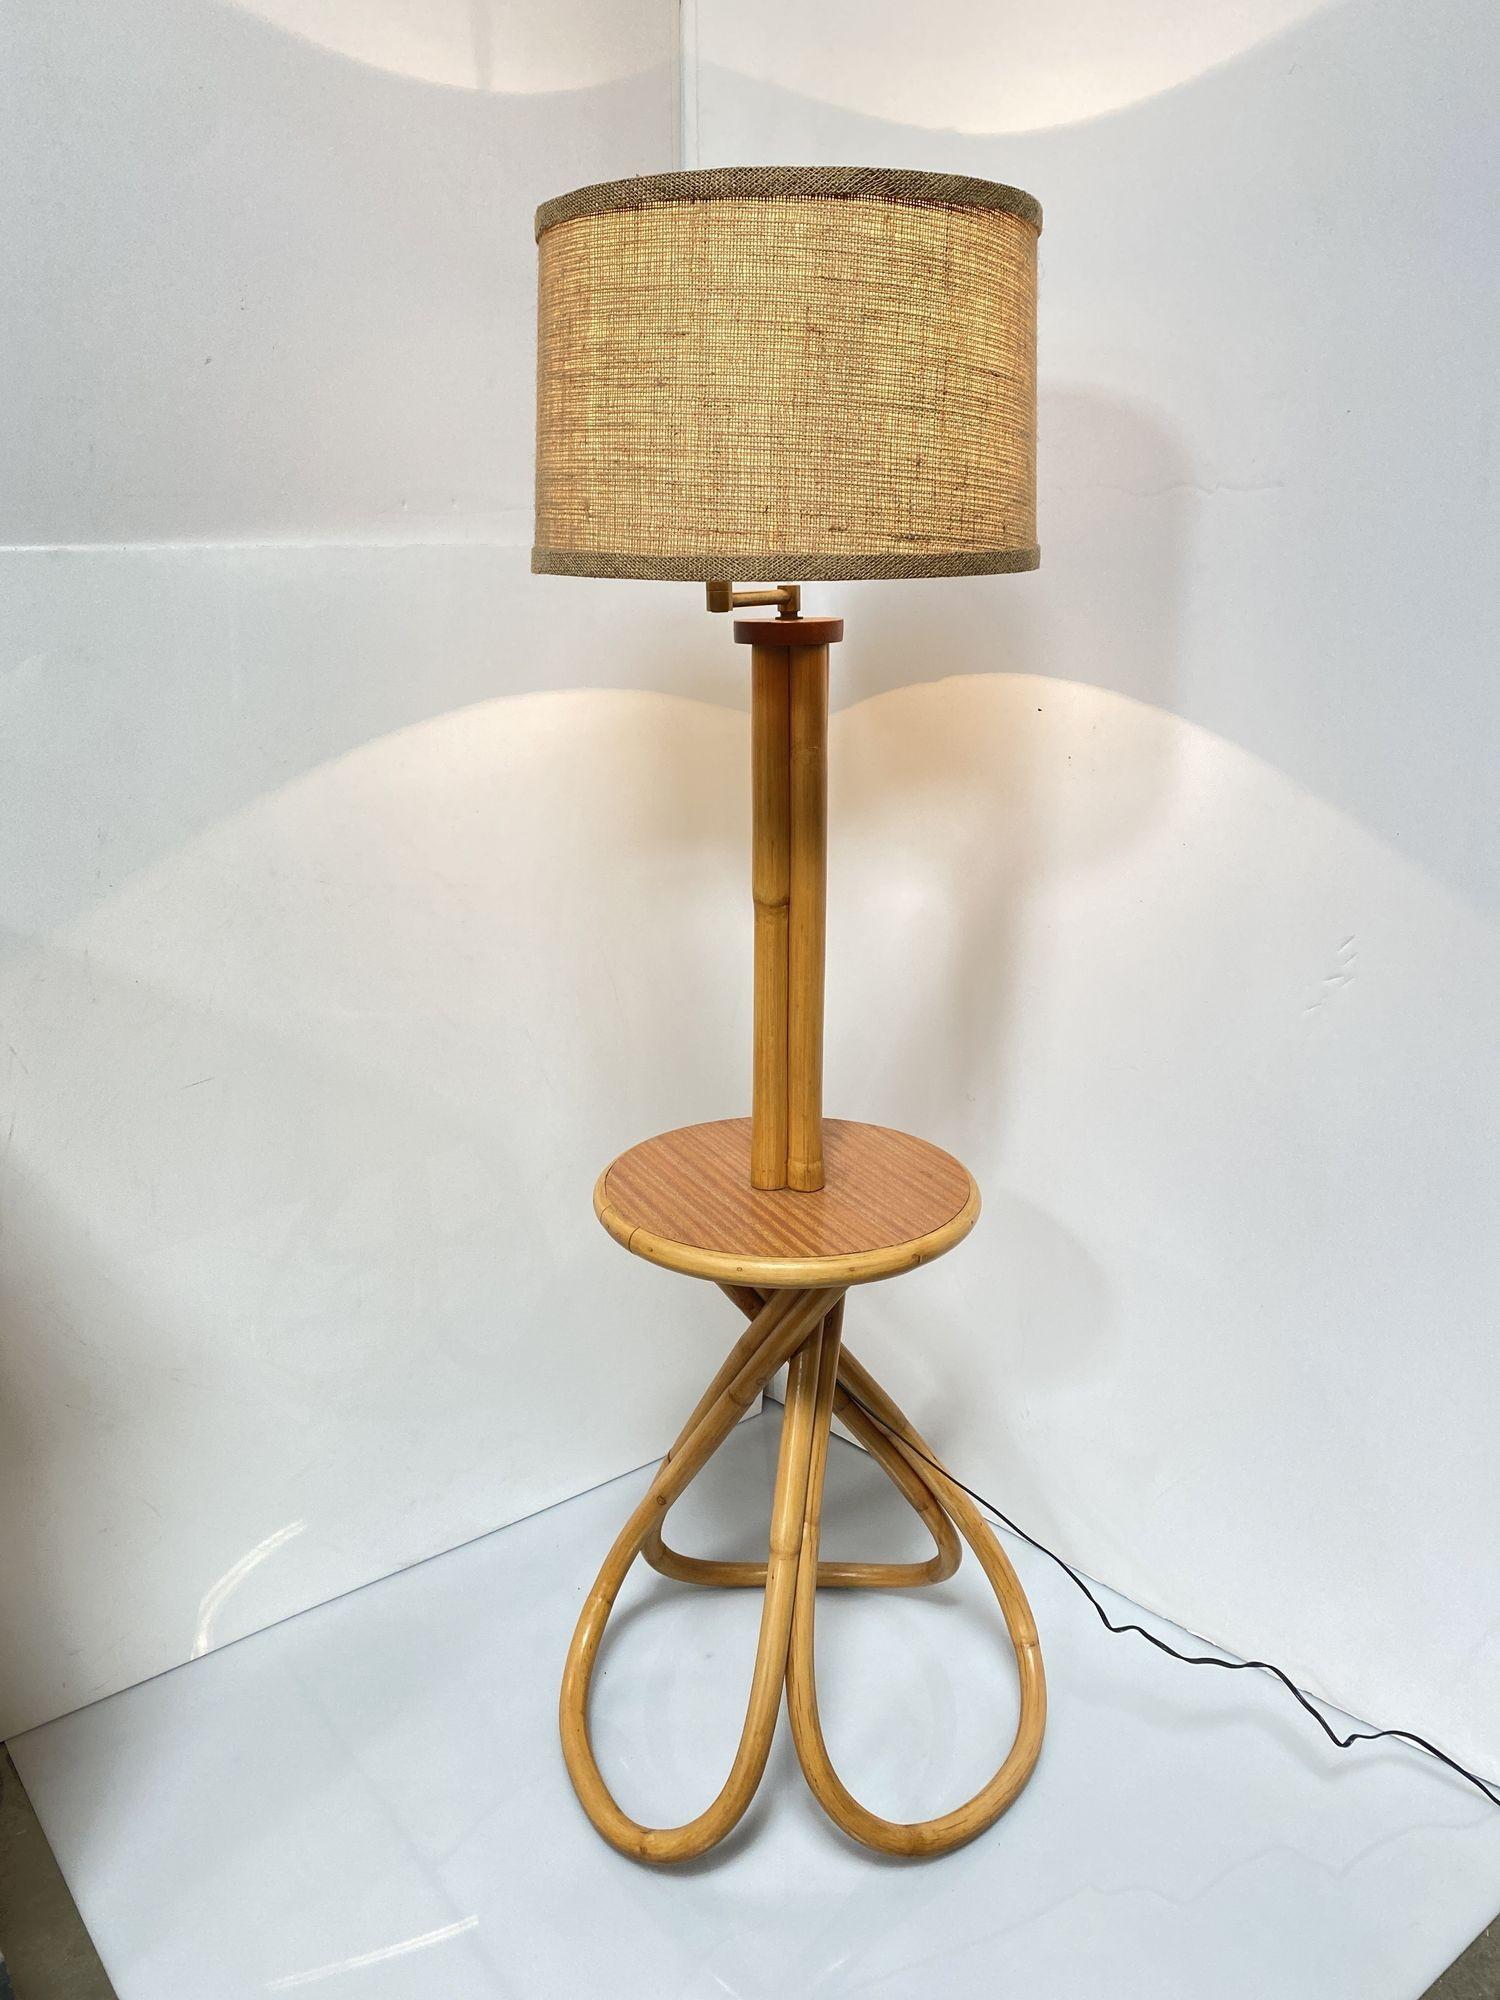 Mid-20th Century Restored Mid Century Bent Rattan Floor Lamp with Side Table Base and Hemp Shade